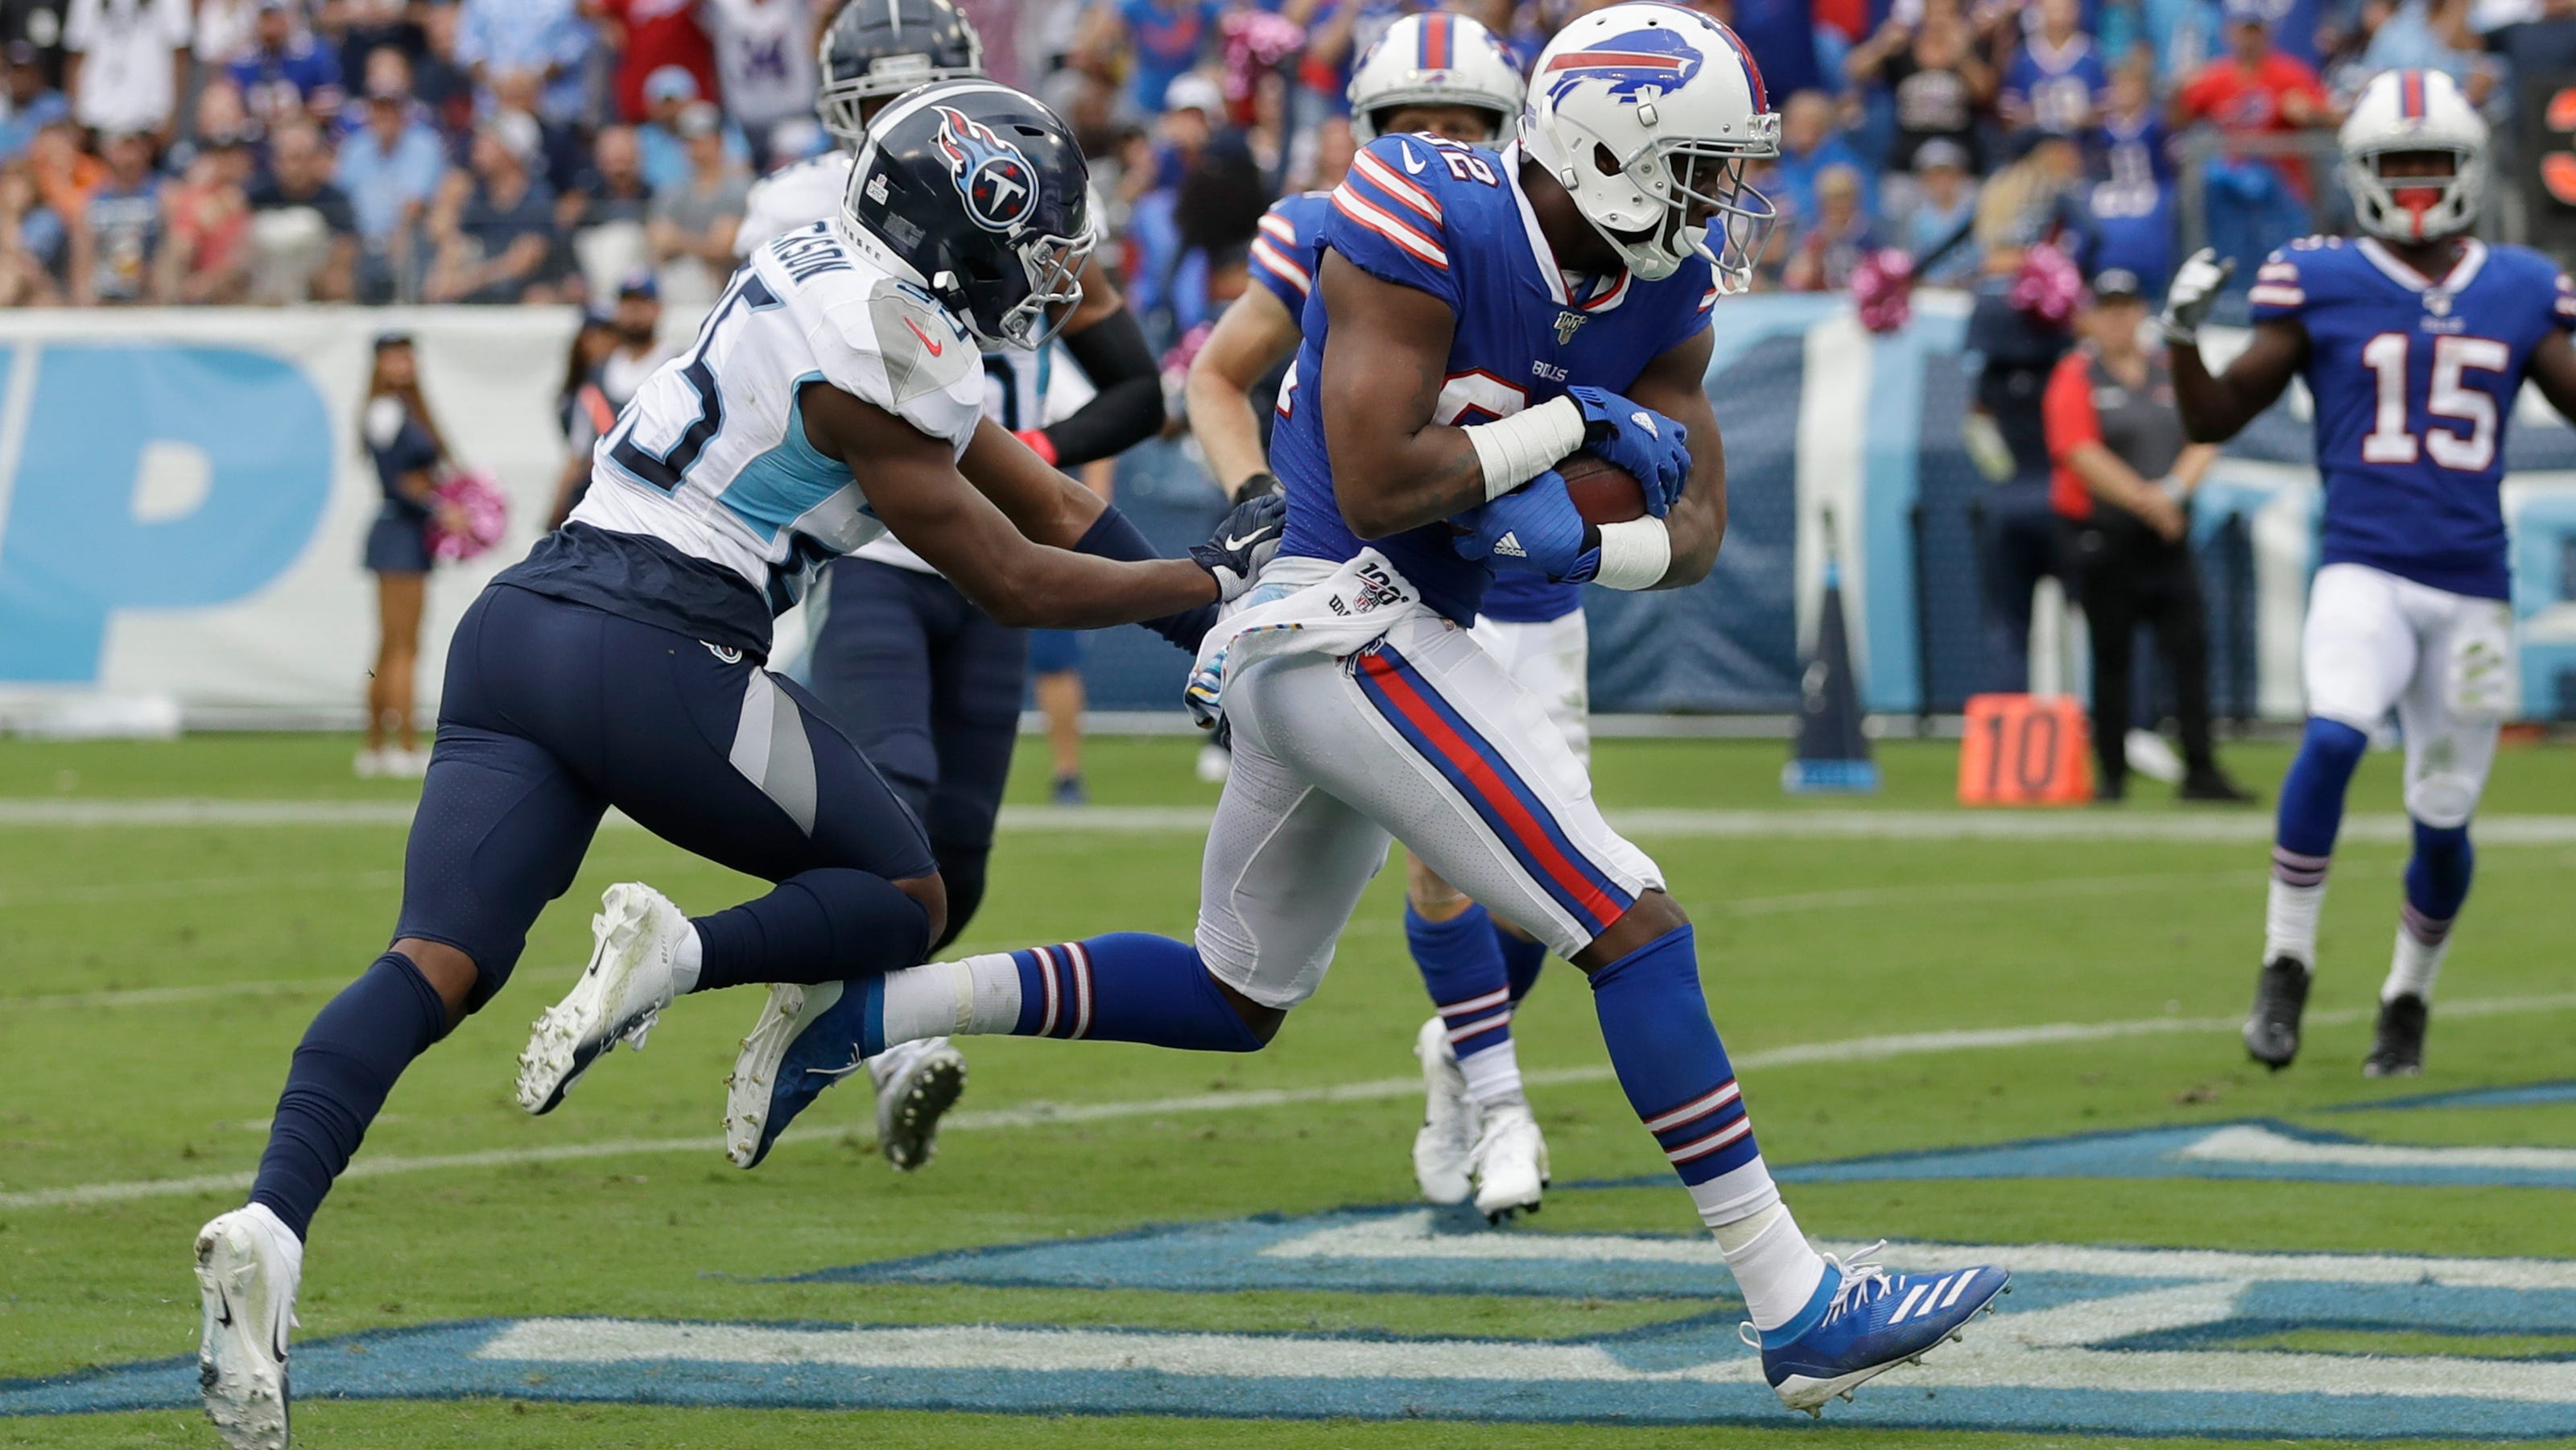 Bills vs. Titans Buffalo bounces back by hammering Tennessee